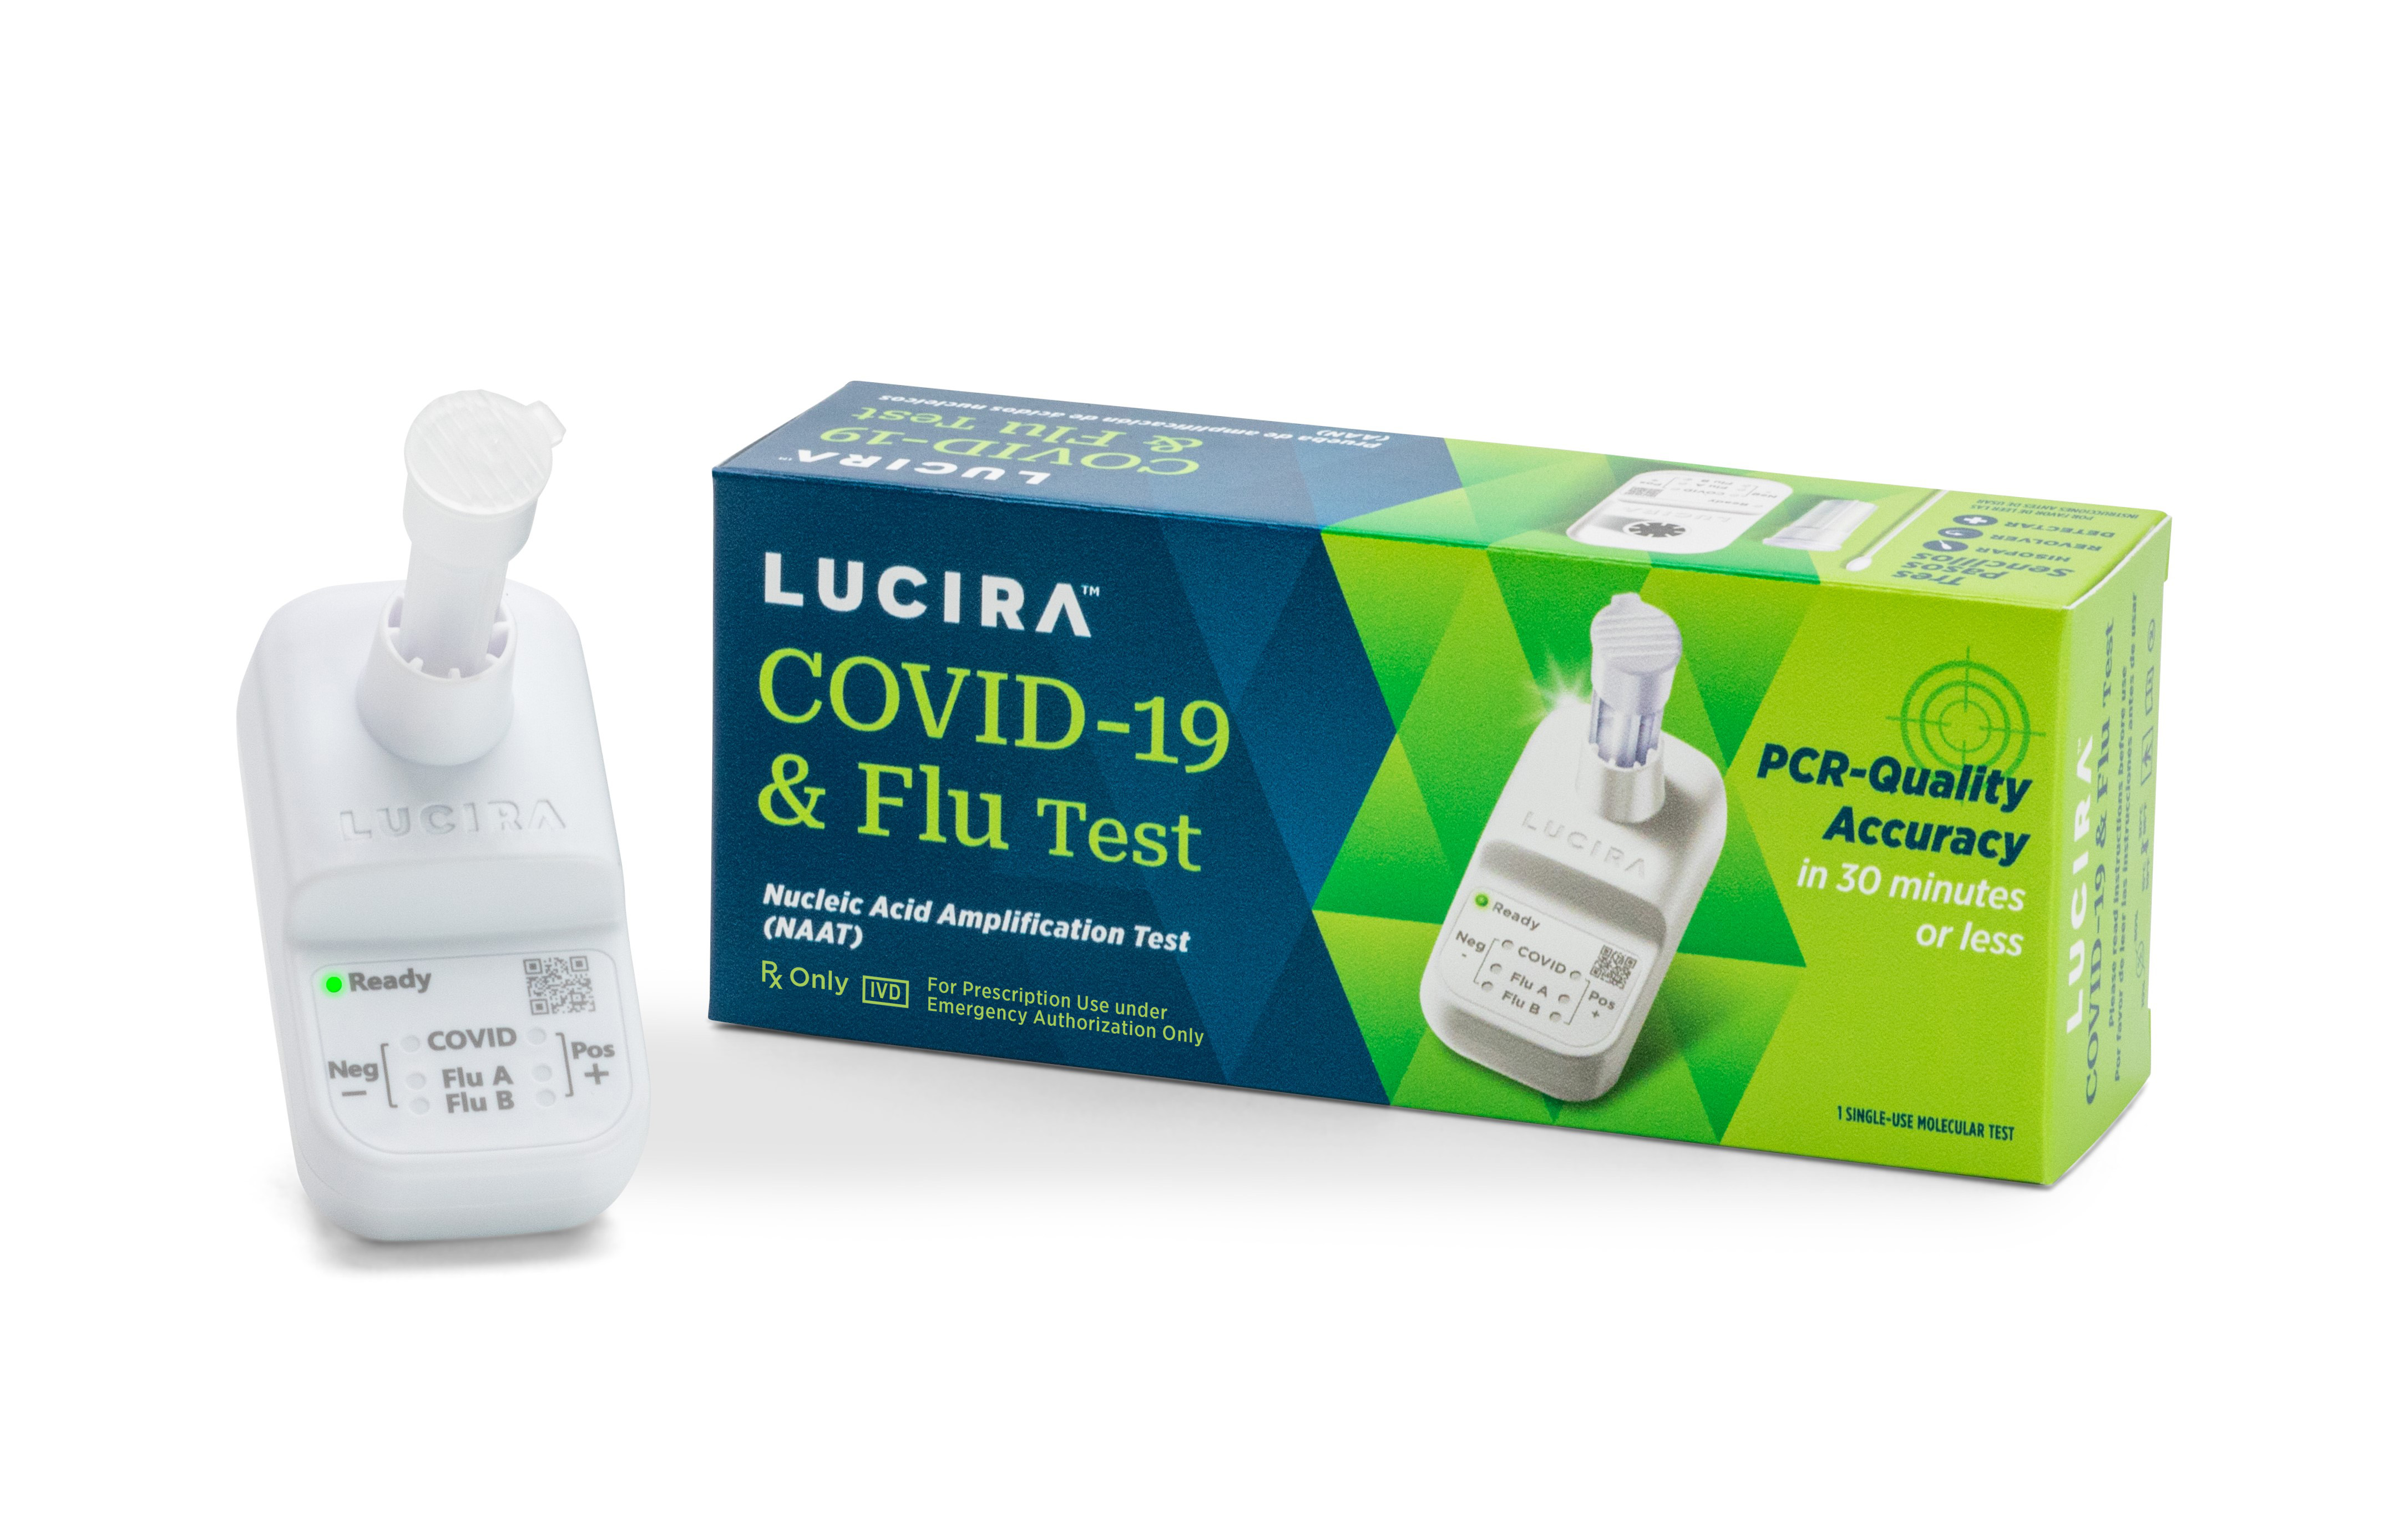 Lucira COVID-19 &amp; Flu Test – PCR-Quality Accuracy for Point-Of-Care this Flu Season